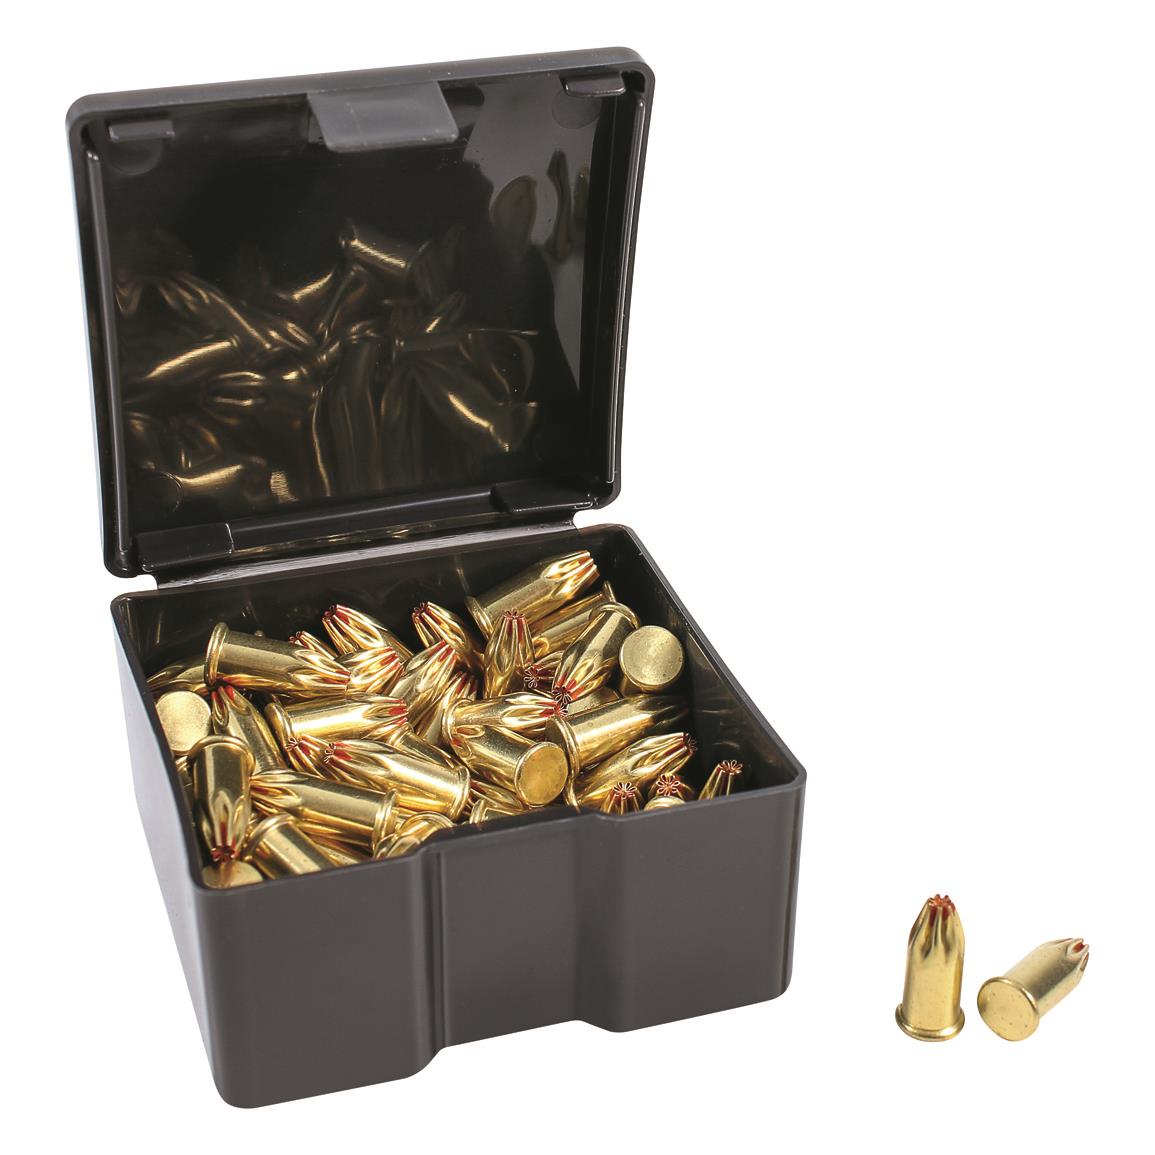 Traditions .27 cal. Powerloads for Crackshot XBR, Box of 100